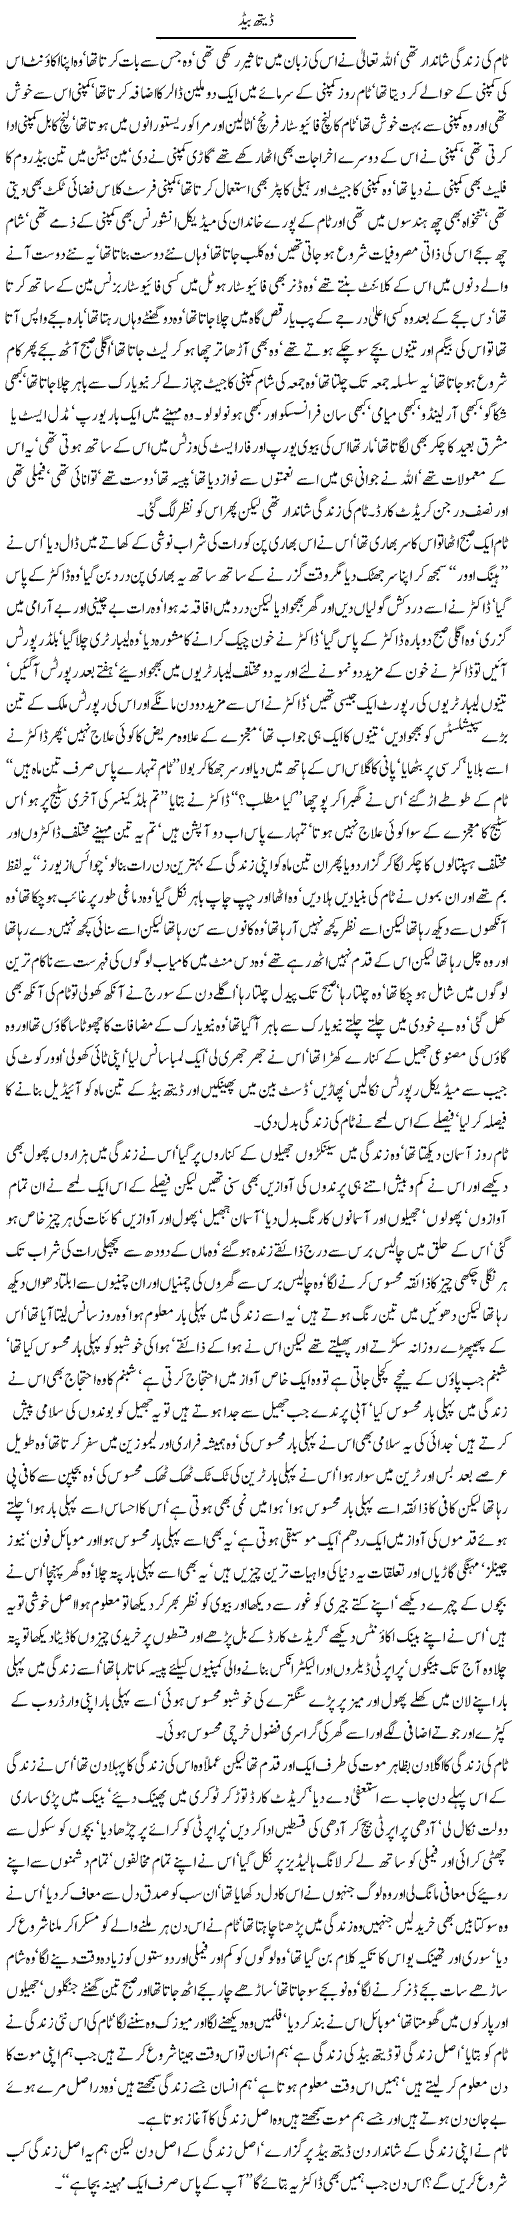 Death Bed by Javed Chaudhry